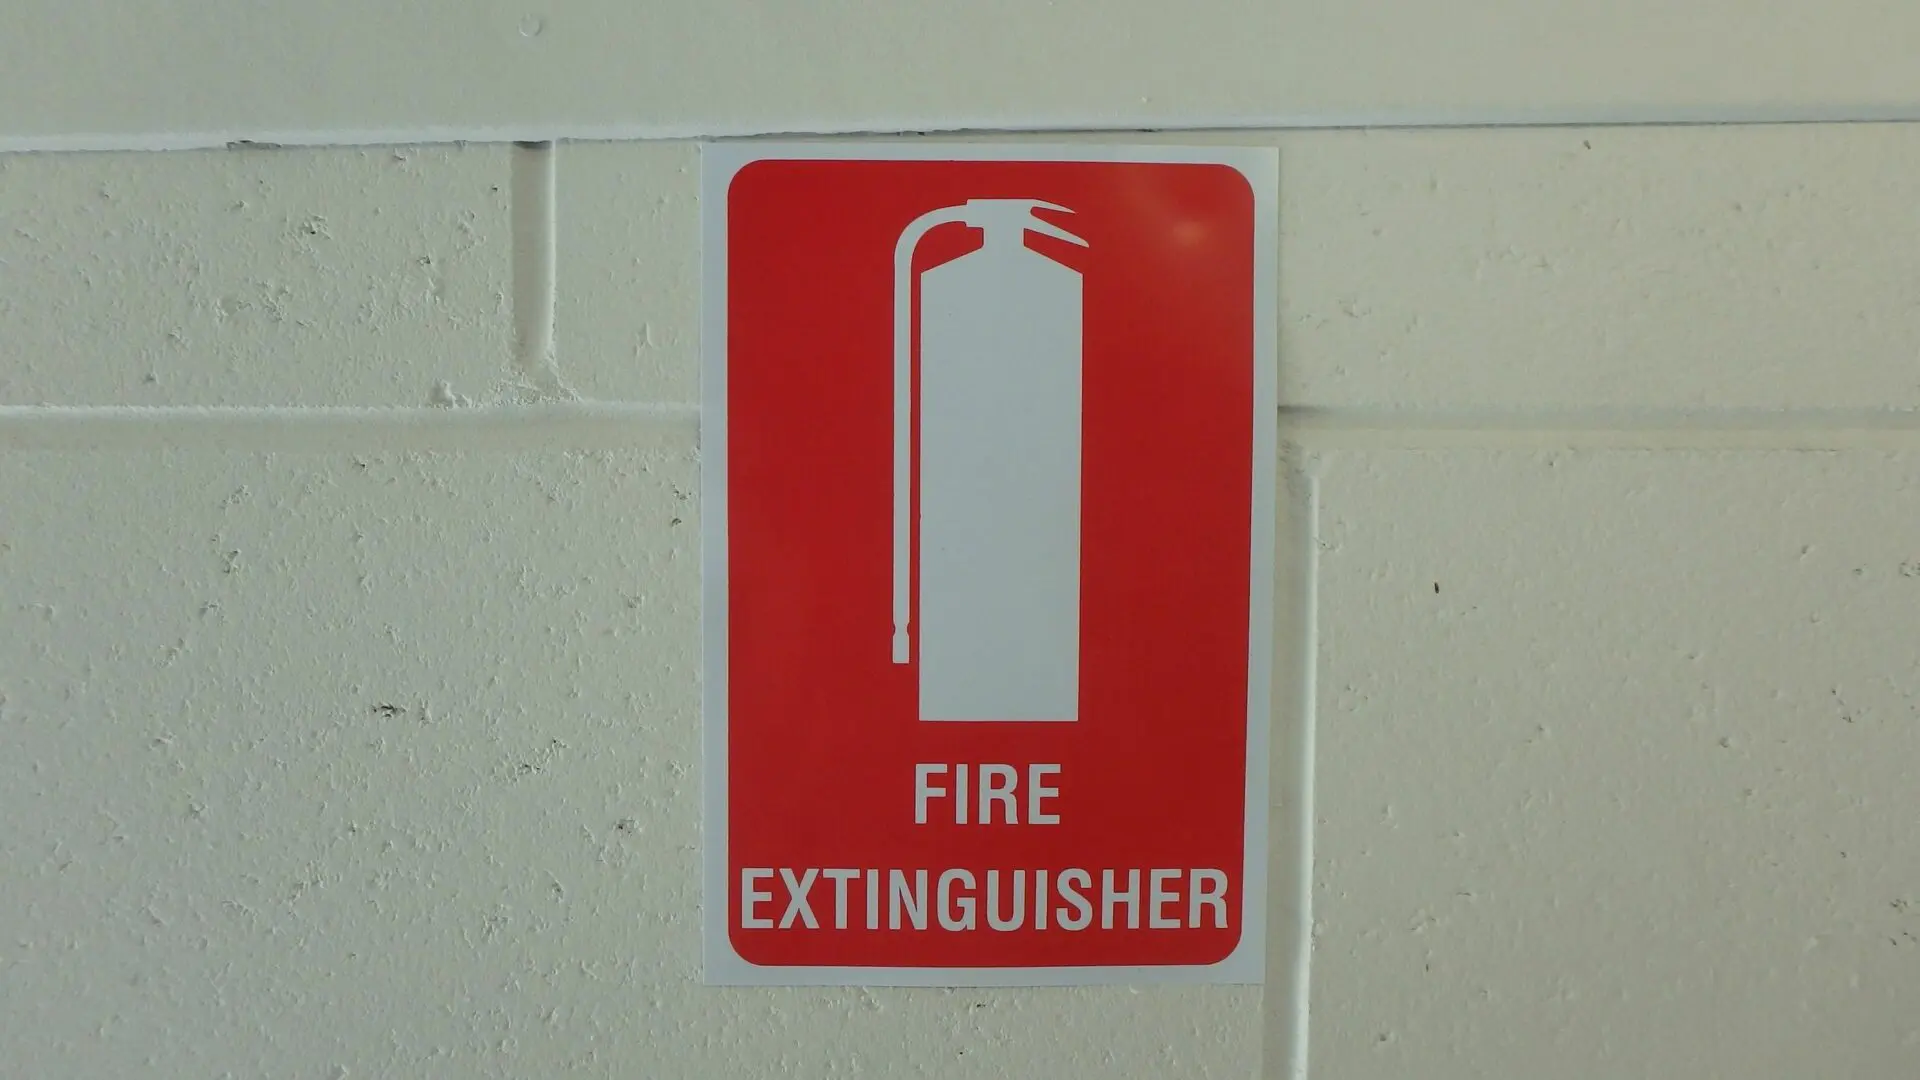 A fire extinguisher sign on the side of a wall.